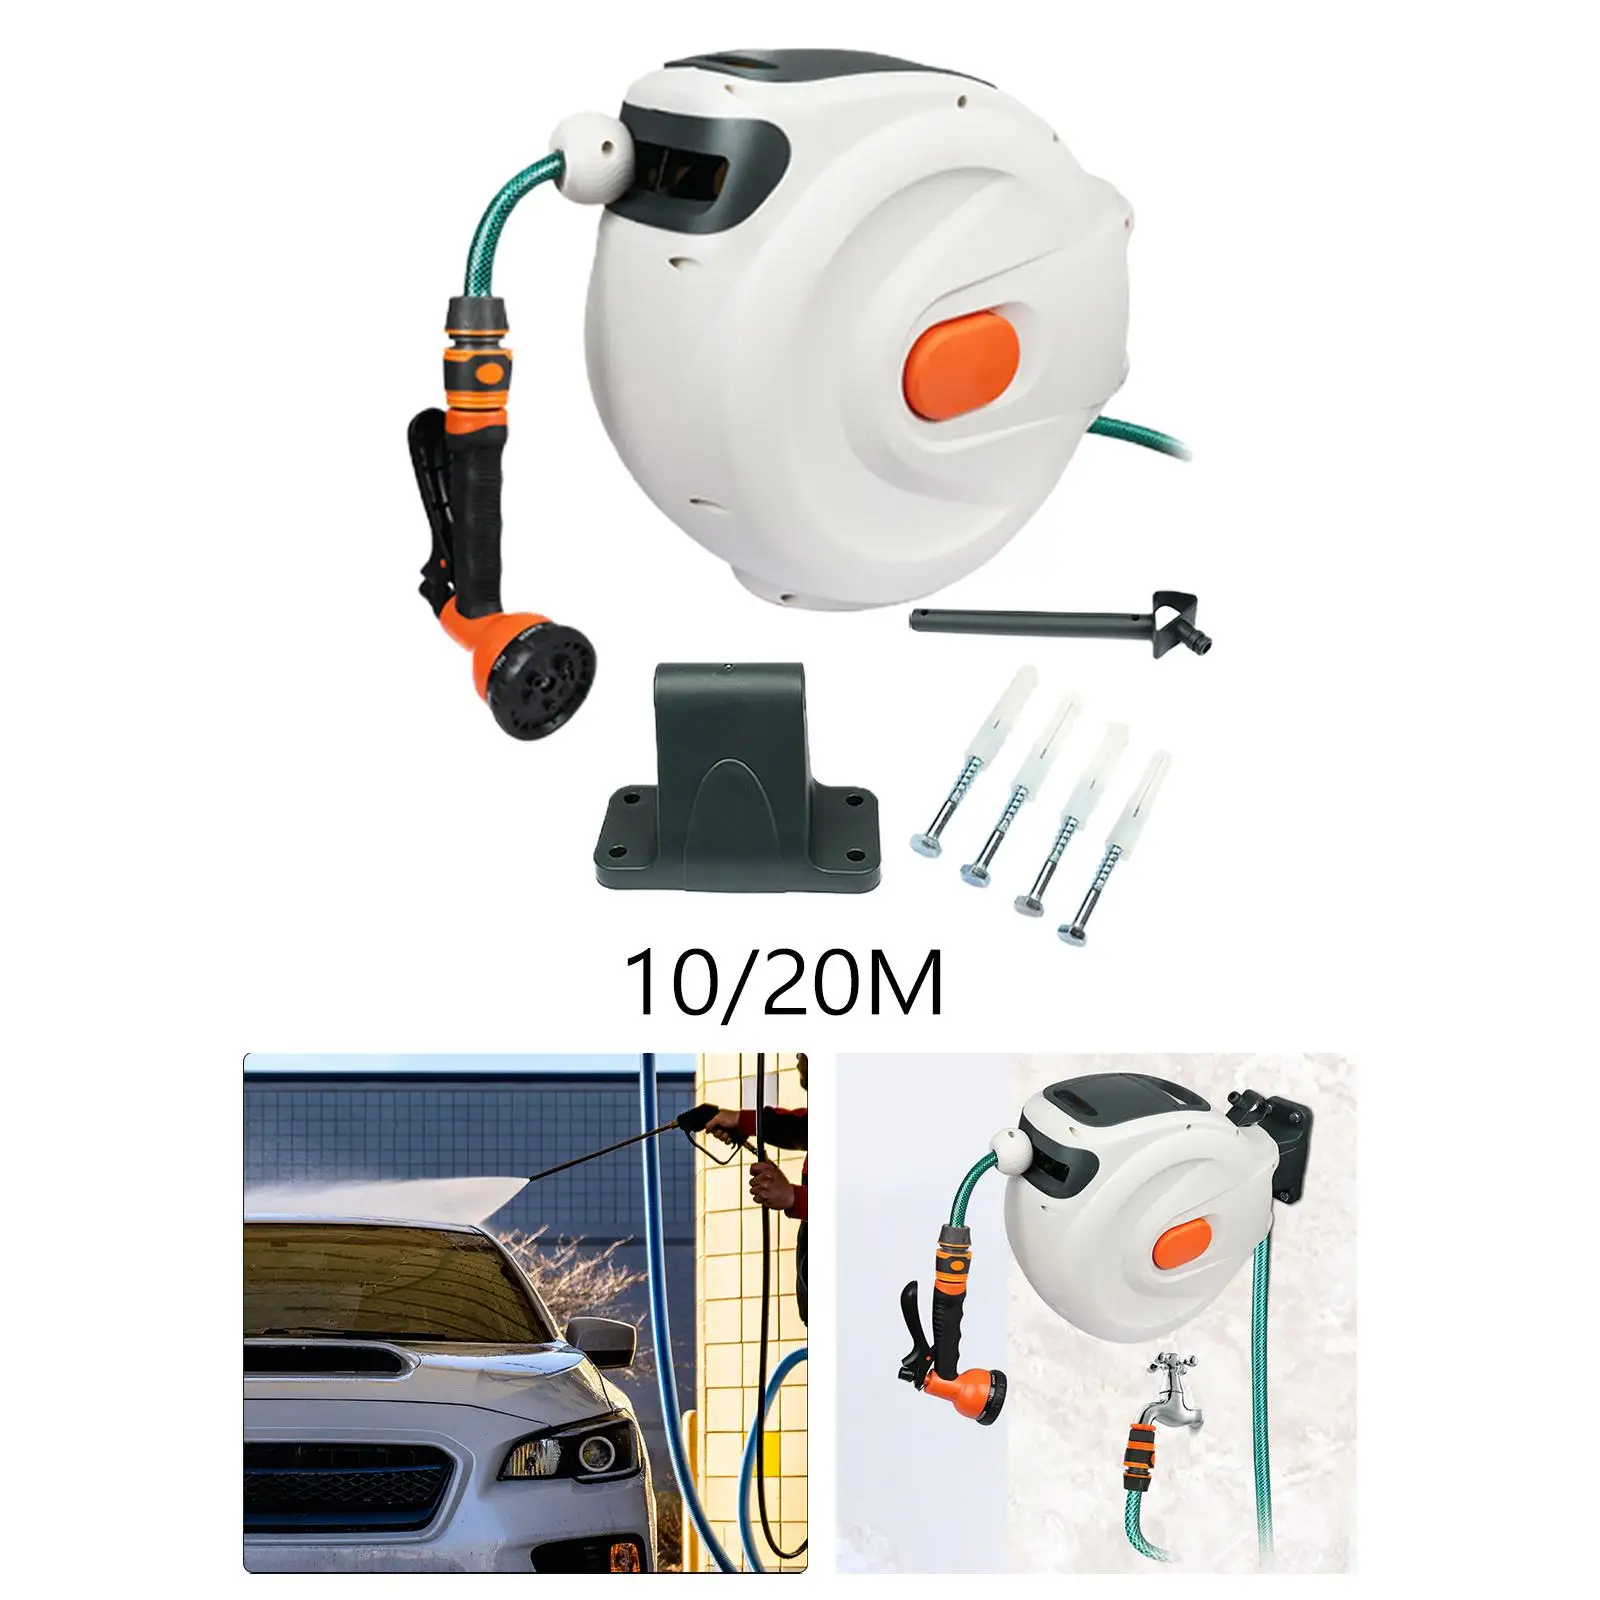 Hose Reel 7 Pattern Hose Nozzle Slow Return System for Outdoor Watering